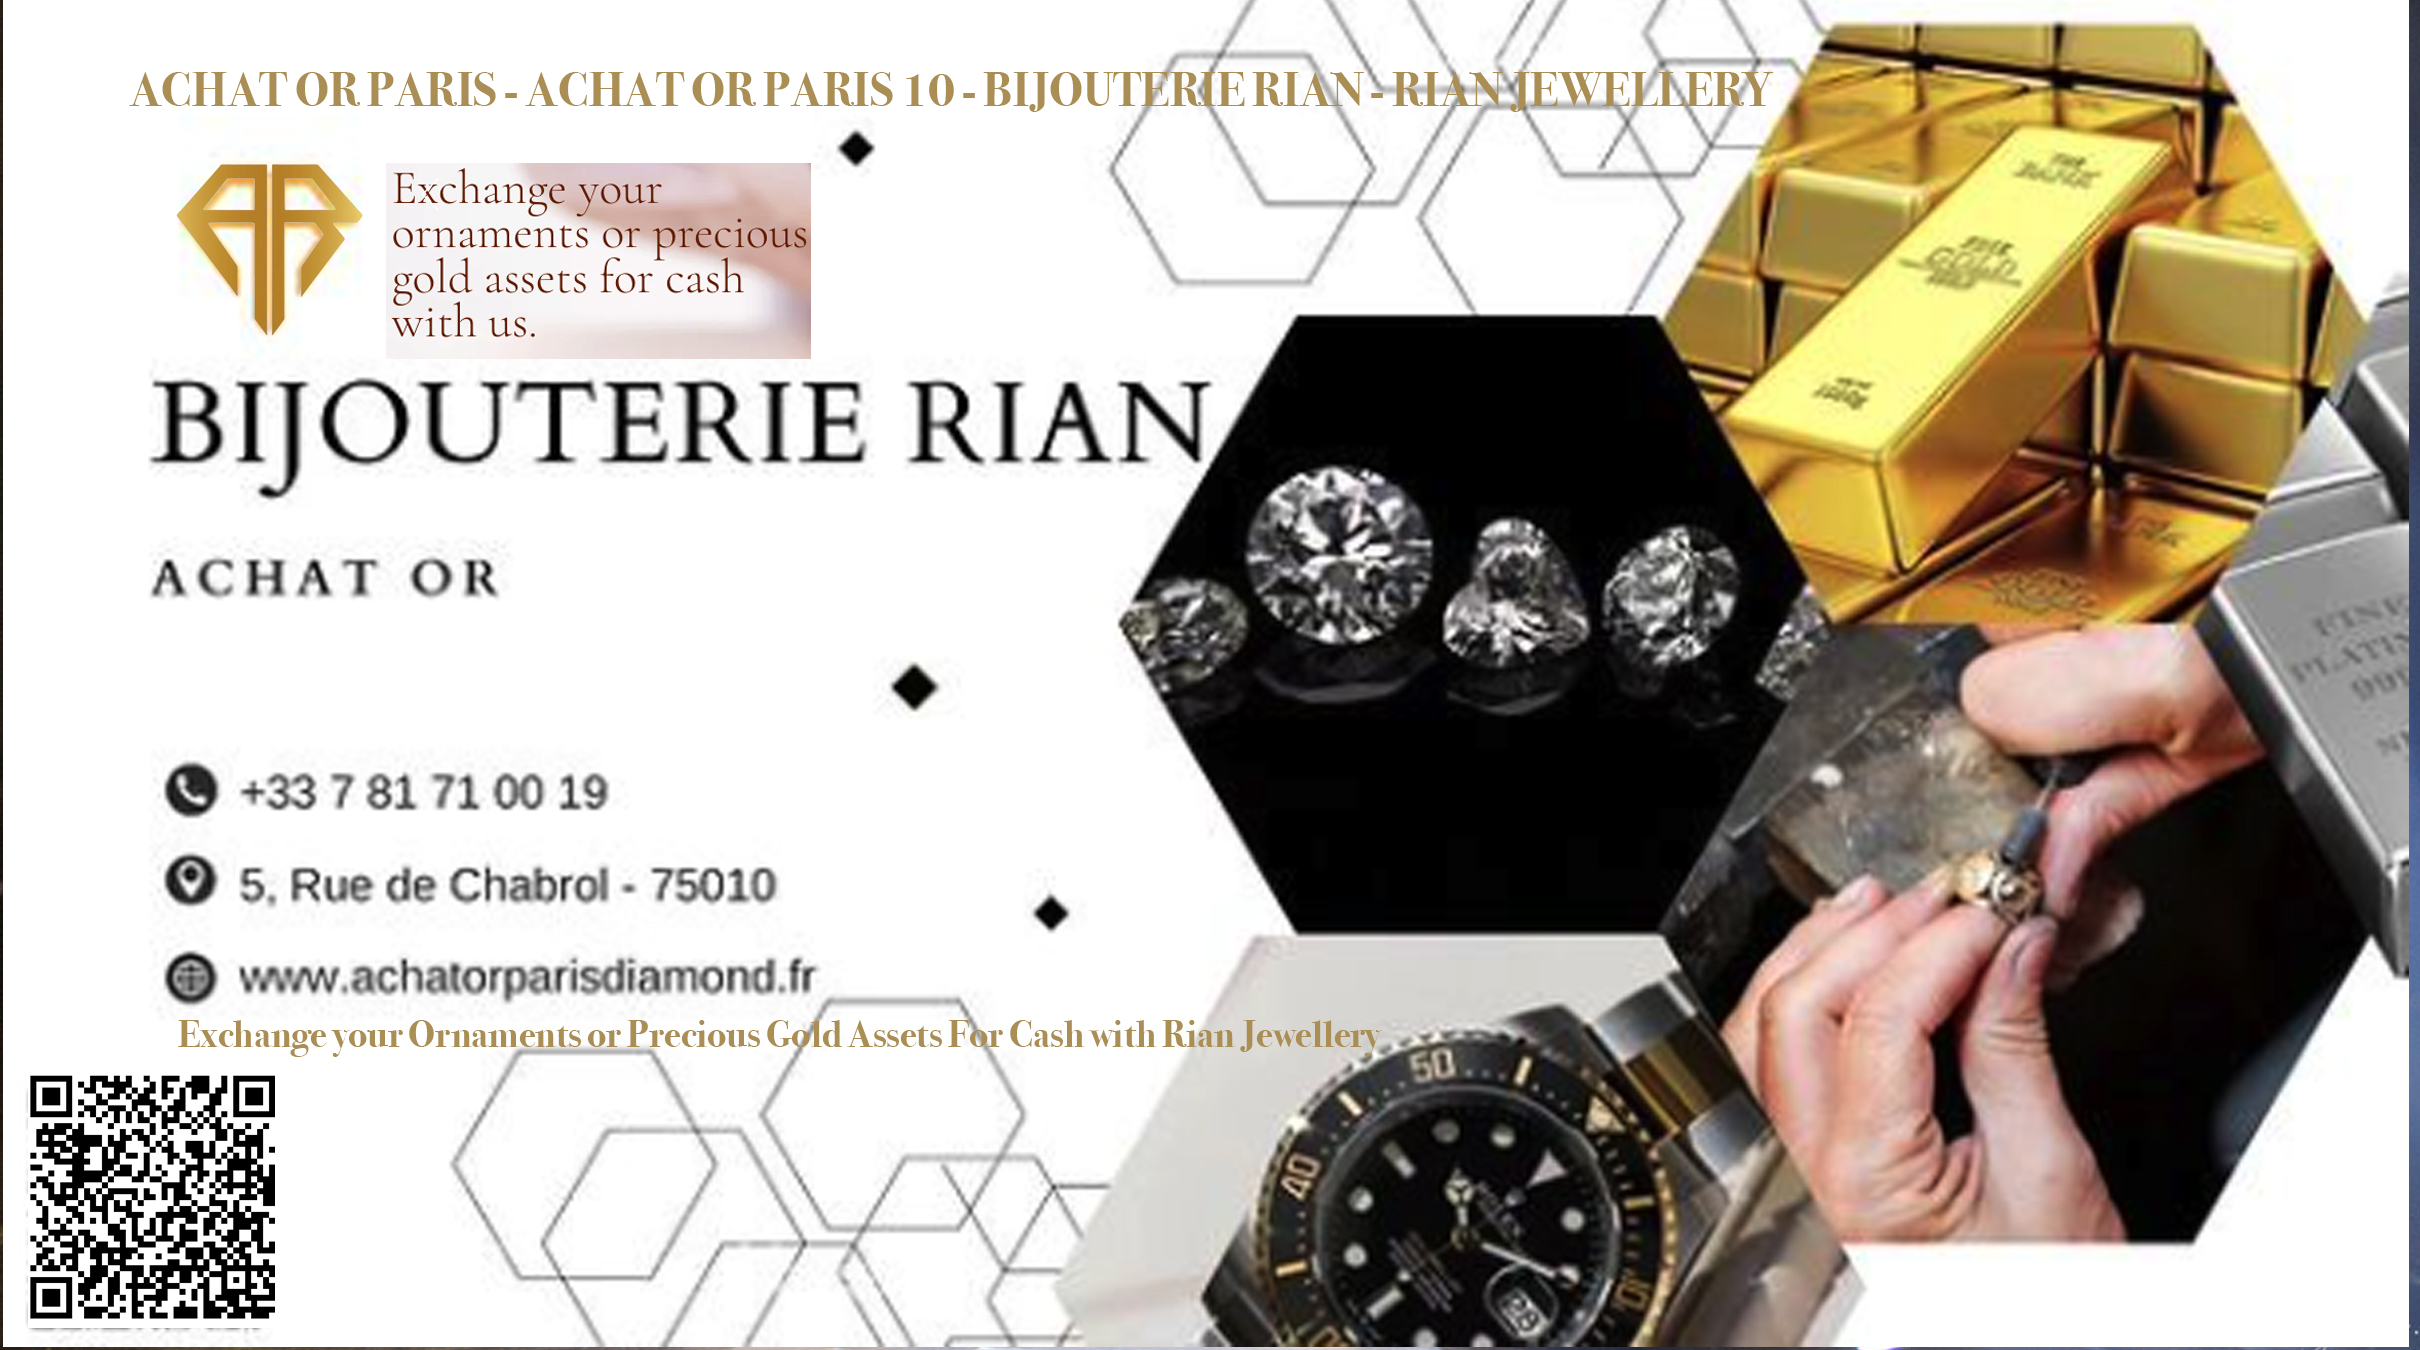 AFRICA-VOGUE-COVER-ACHAT-OR-PARIS-ACHAT-OR-PARIS-10-BIJOUTERIE-RIAN-RIAN-JEWELLERY-DN-AFRIC-Media-Partner